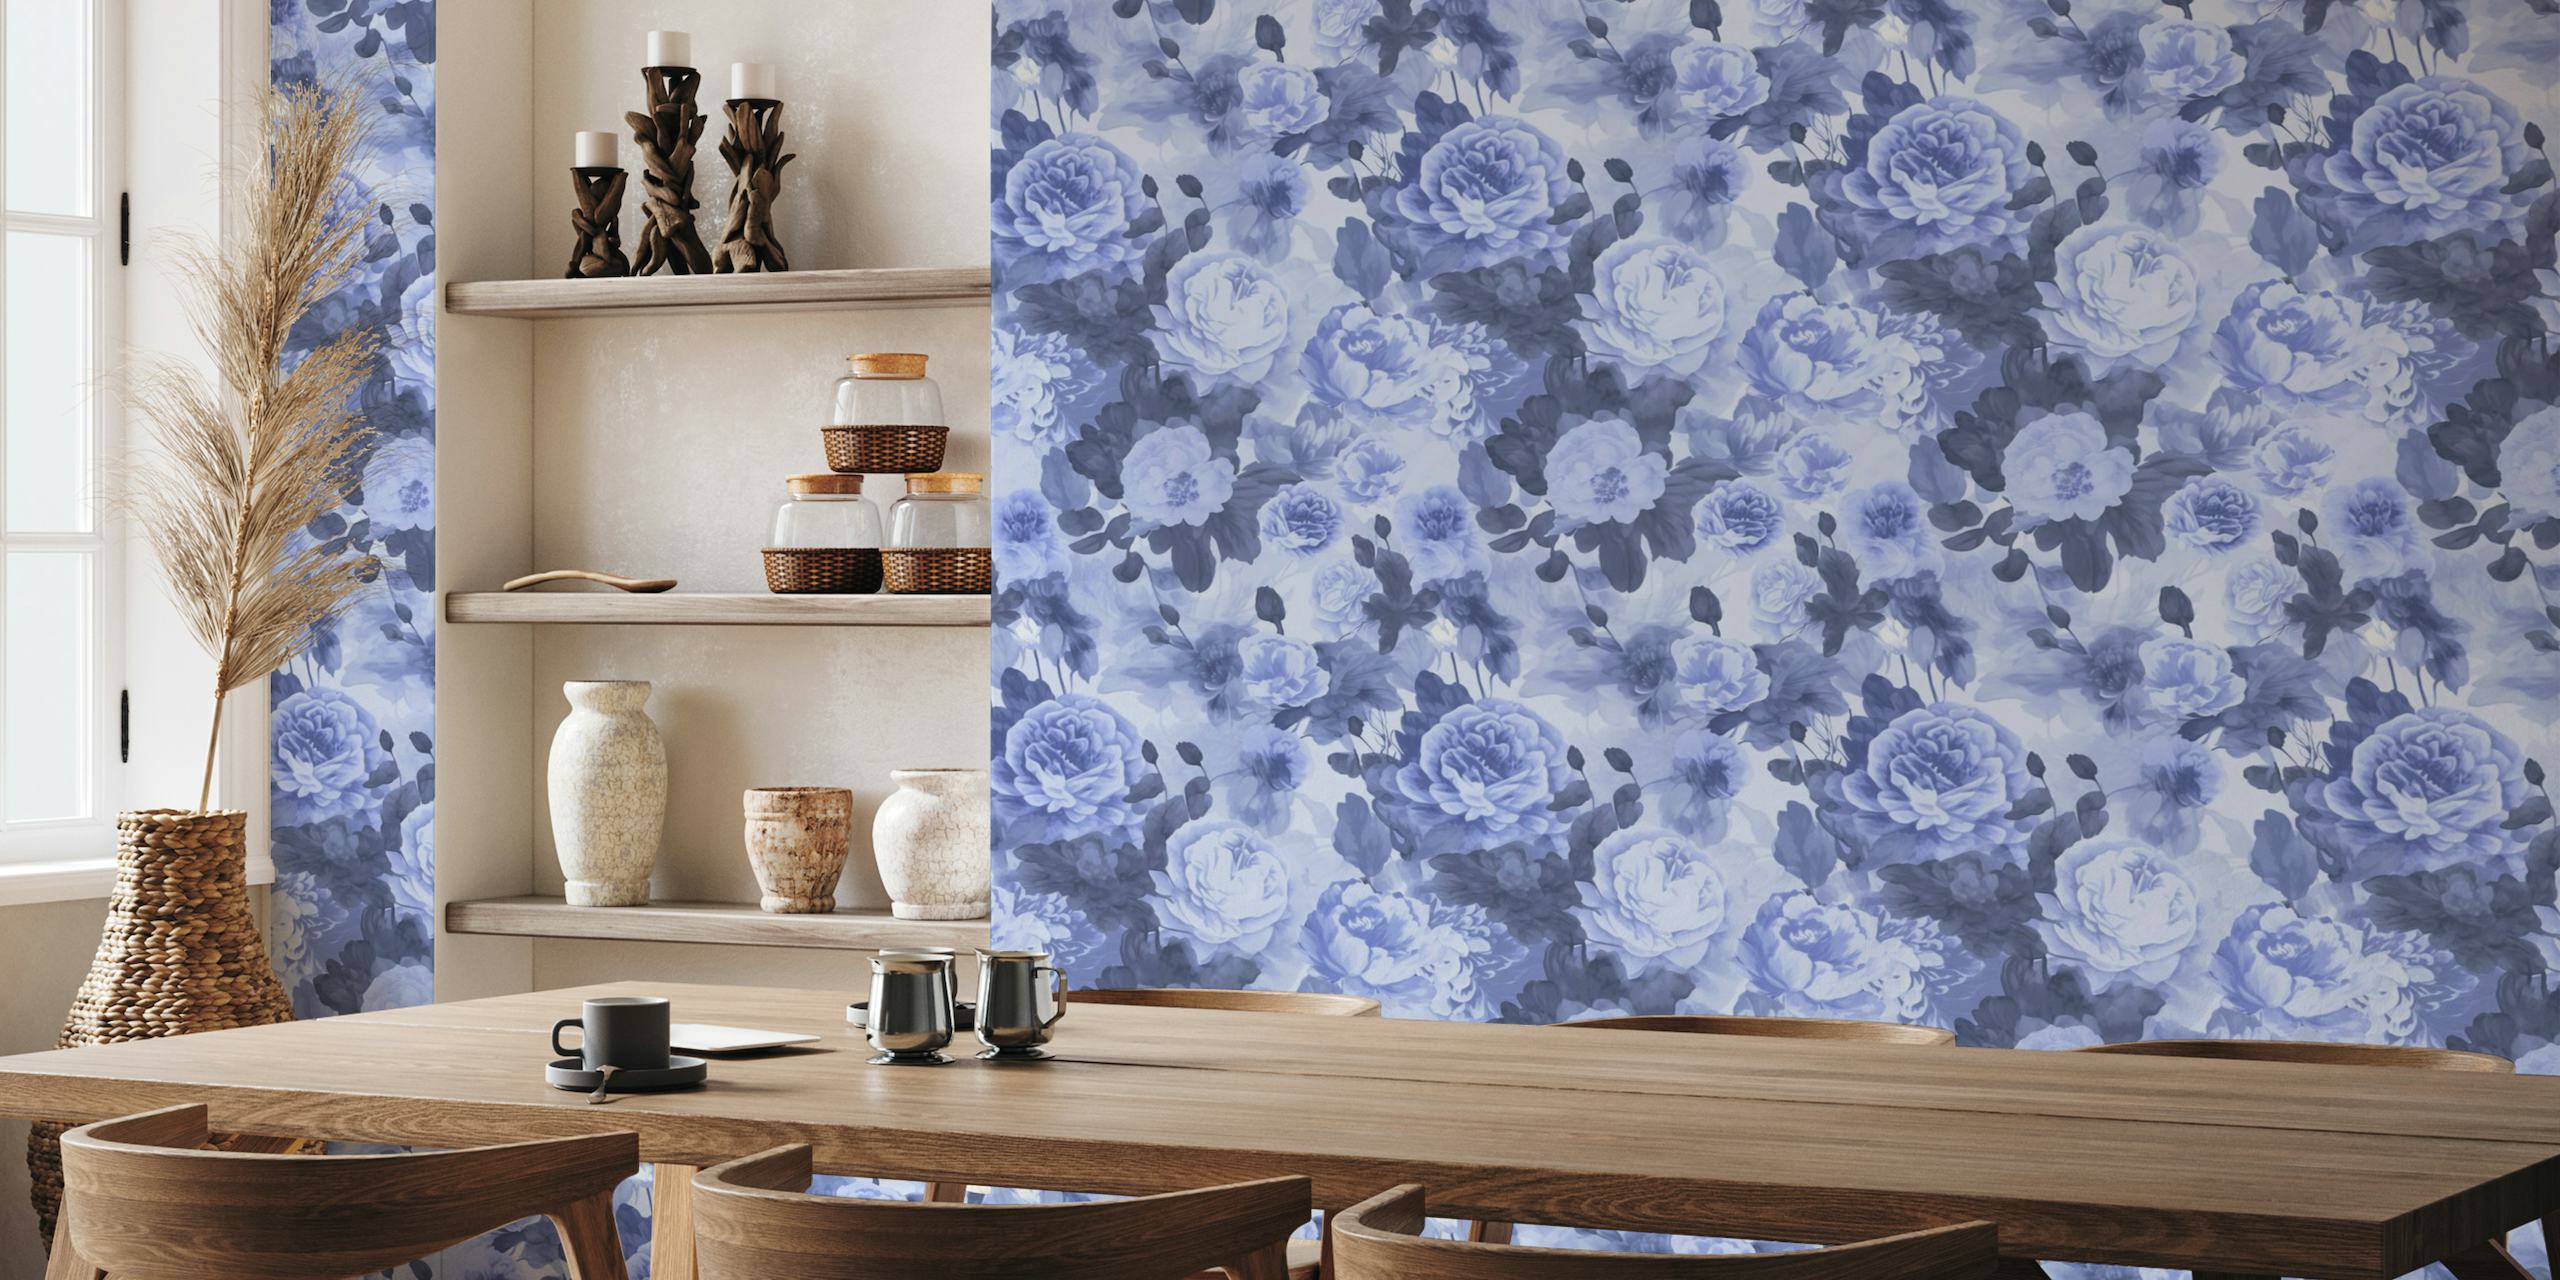 Baroque Roses Floral Nostalgia Design In Moody Colors Blue tapete